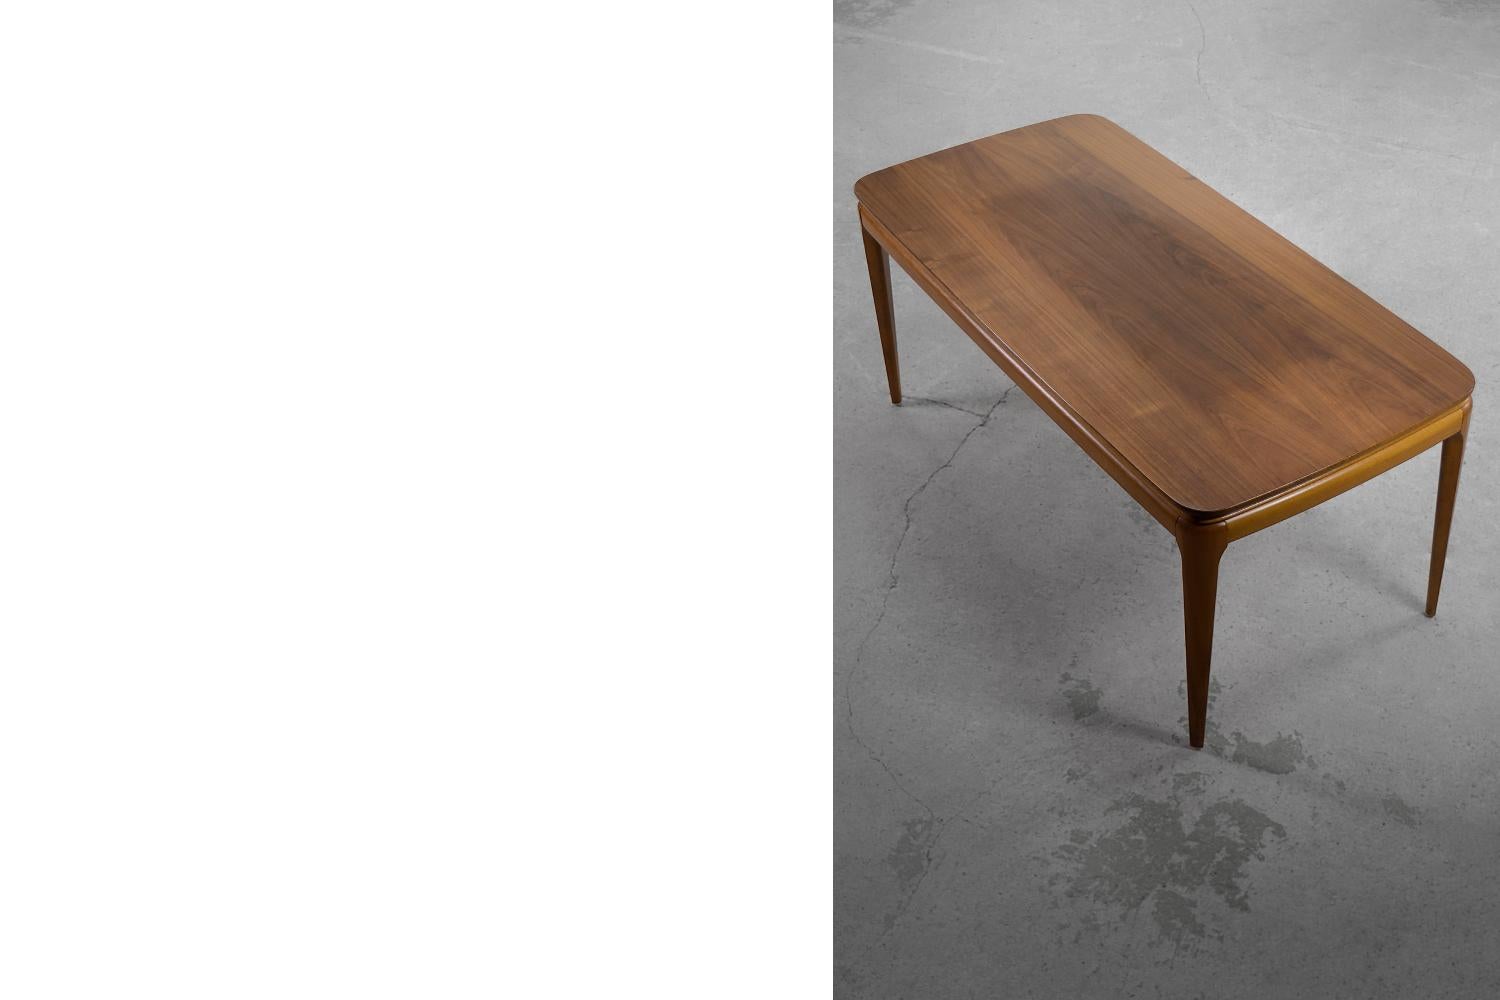 Mid-20th Century Vintage Mid-Century Scandinavian Modern Cherry Wood Low Coffee Table, 1950s For Sale